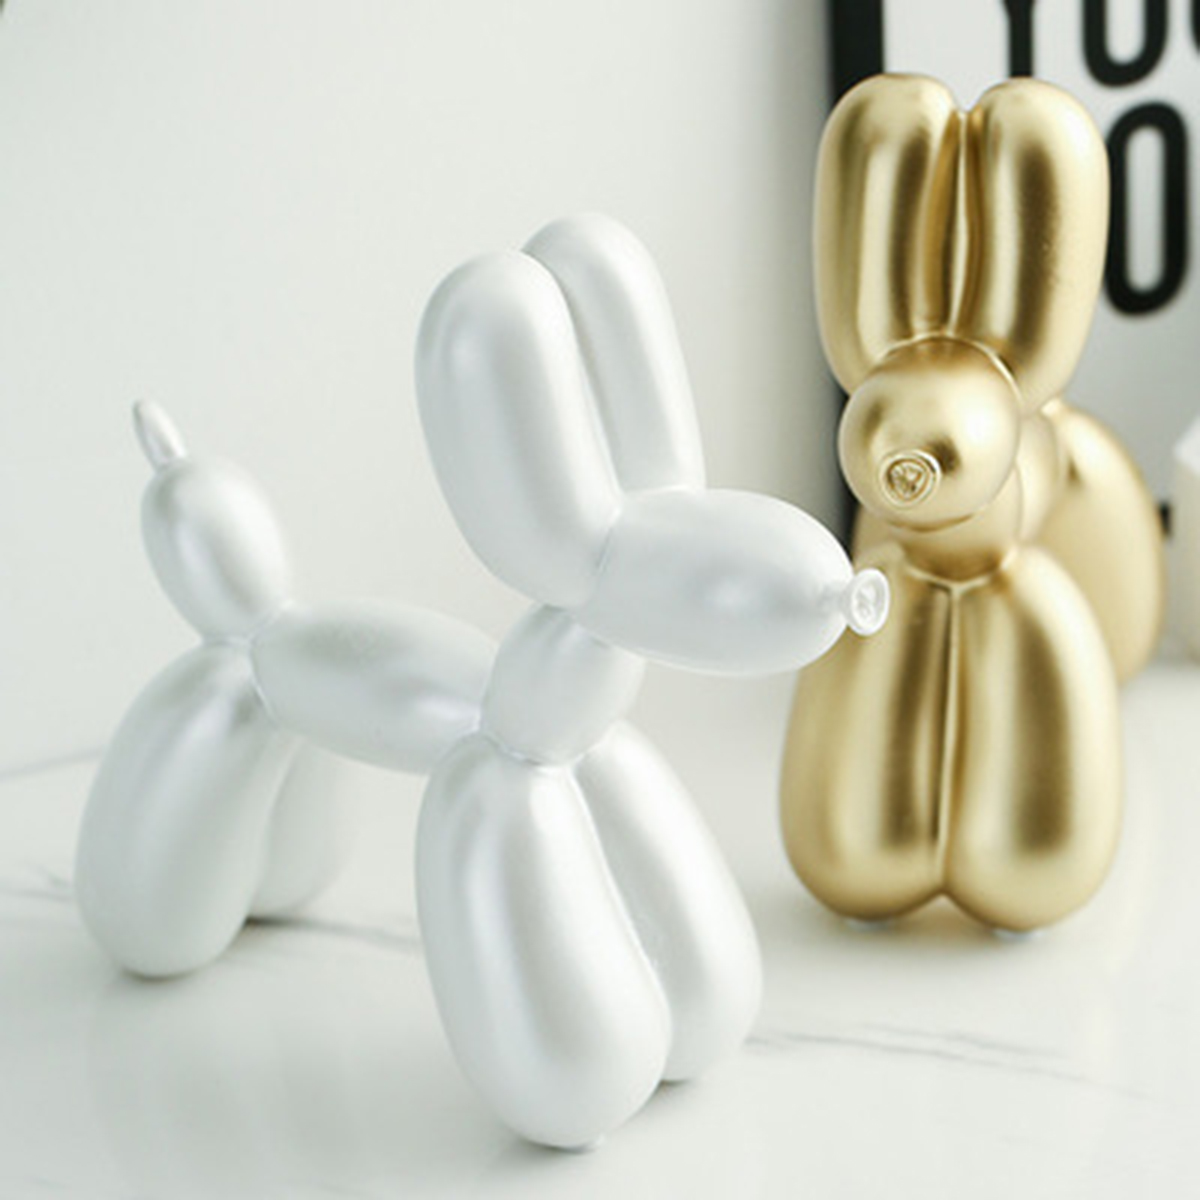 

Cute Resin Balloon Dog Animal Figurine Statue Ornaments Home Decorations